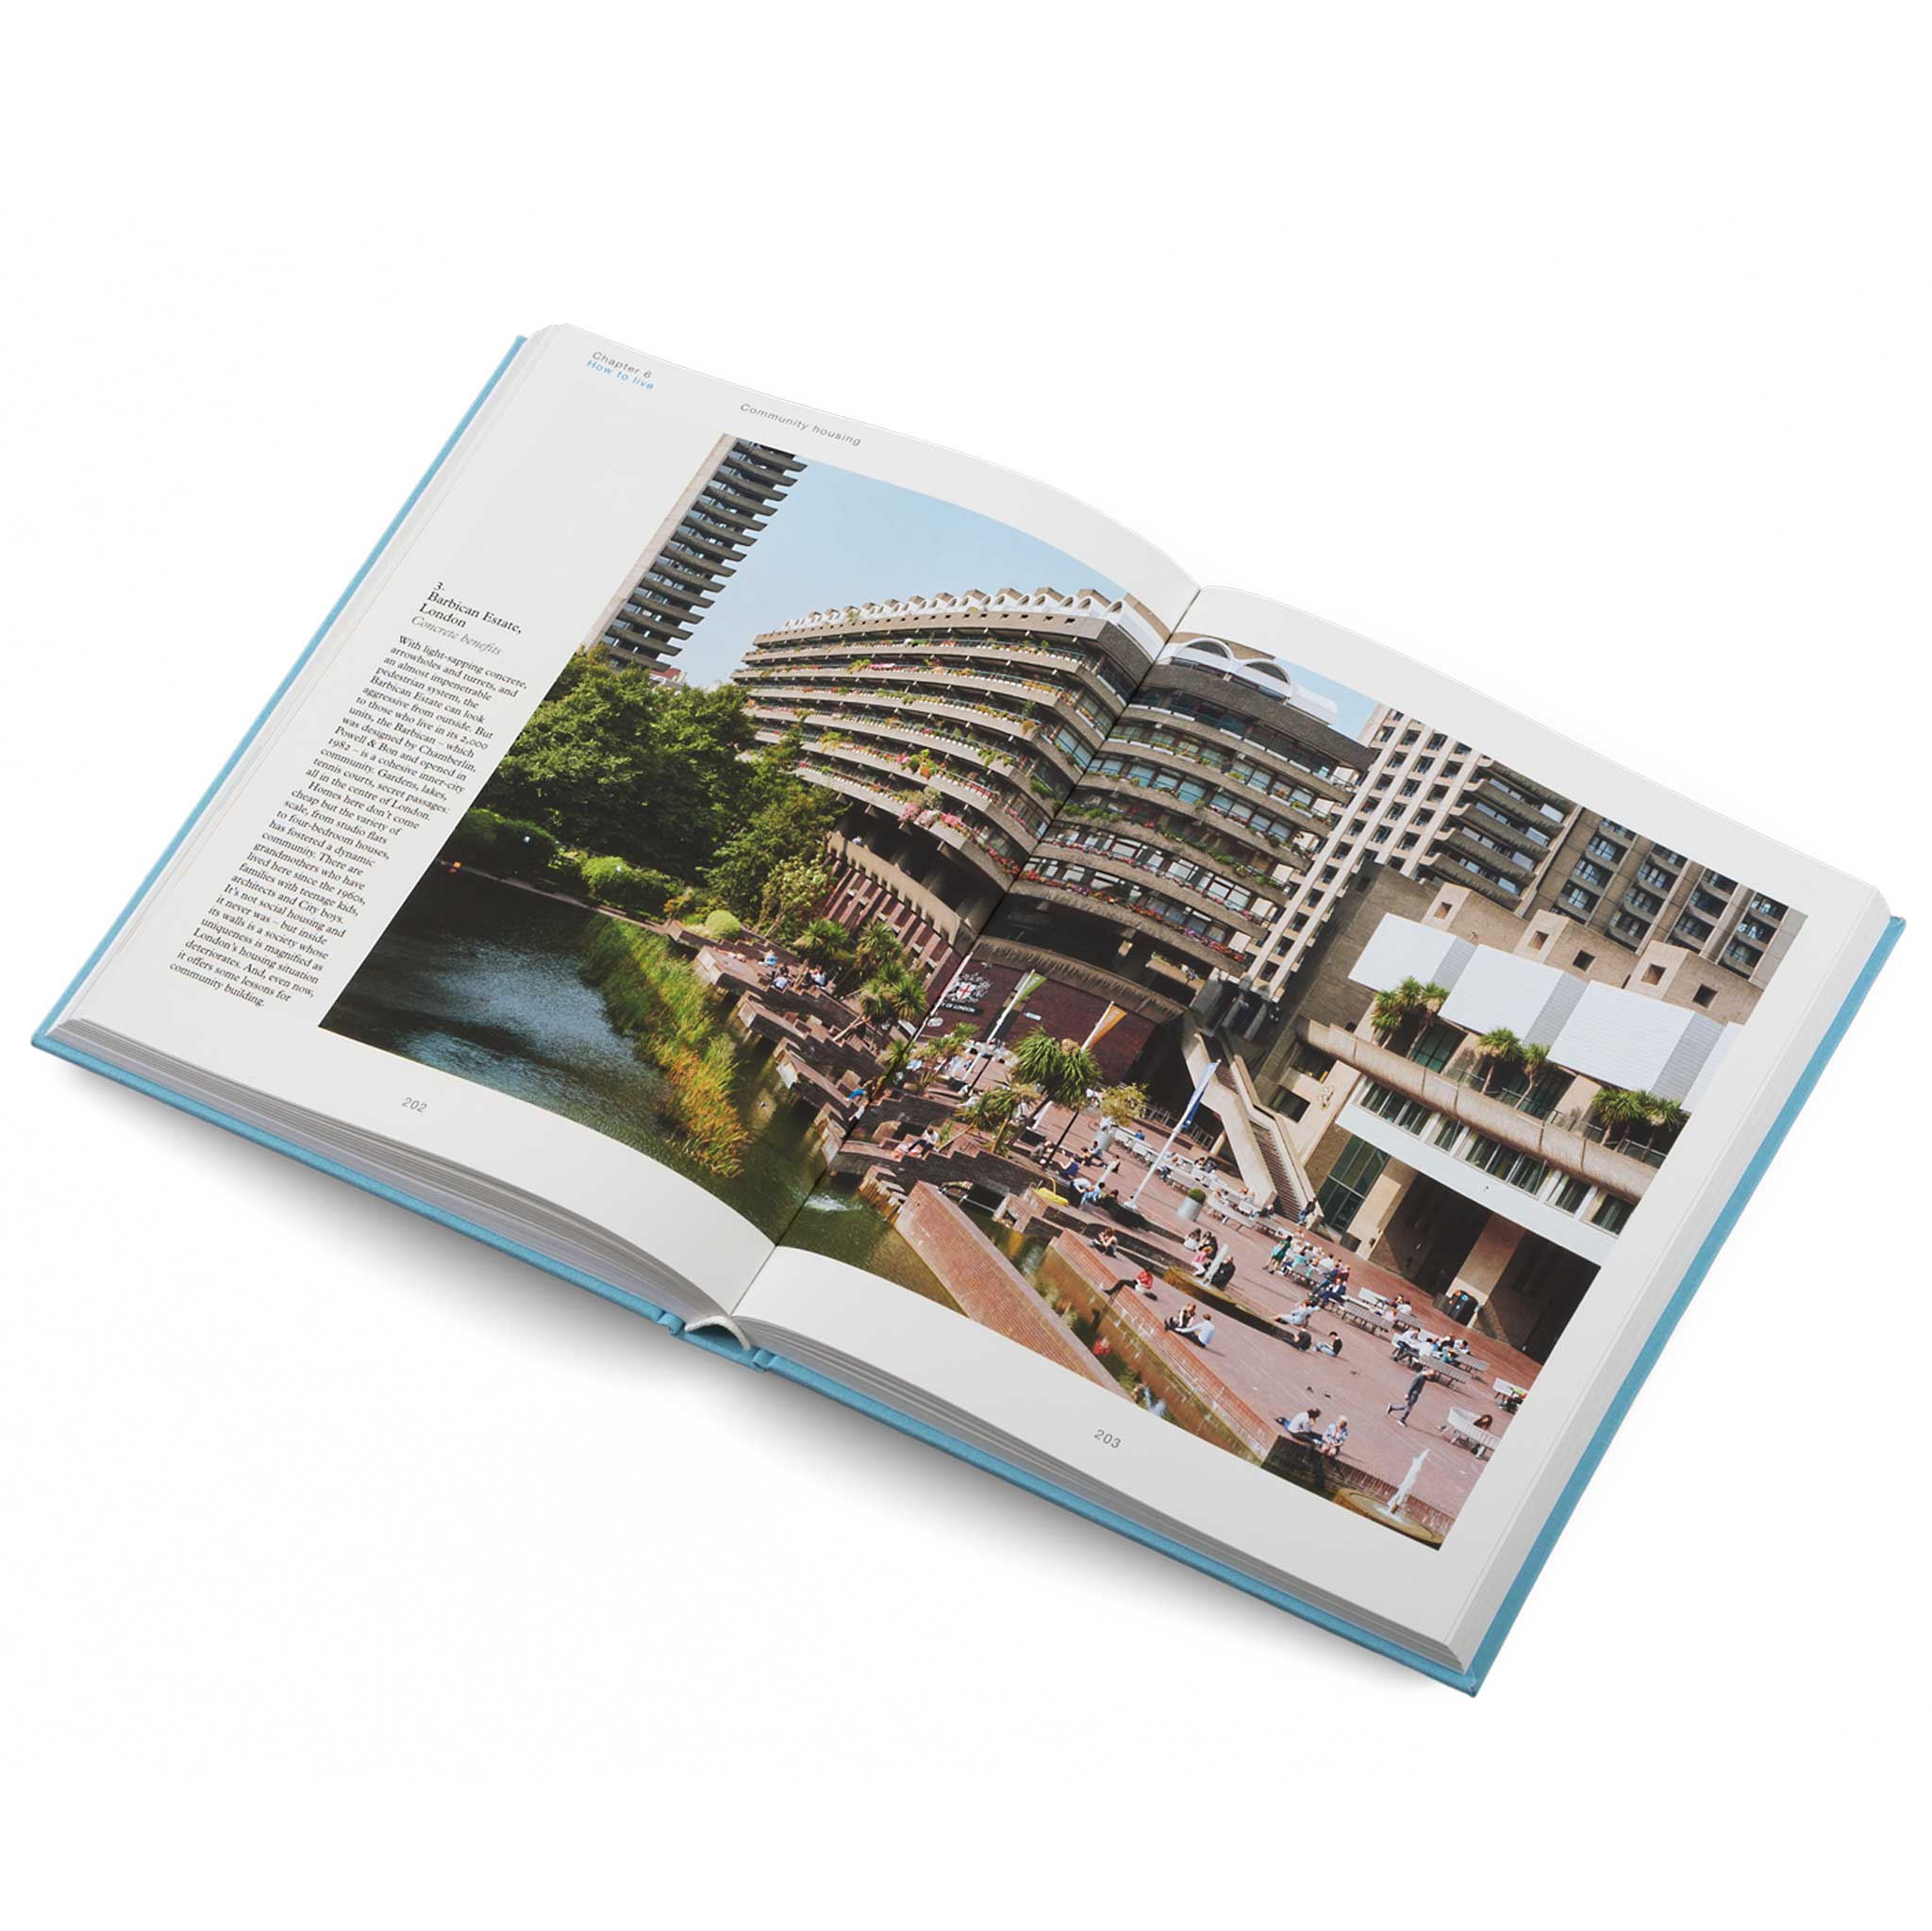 THE MONOCLE GUIDE to BUILDING BETTER CITIES | BOOK | Gestalten Verlag